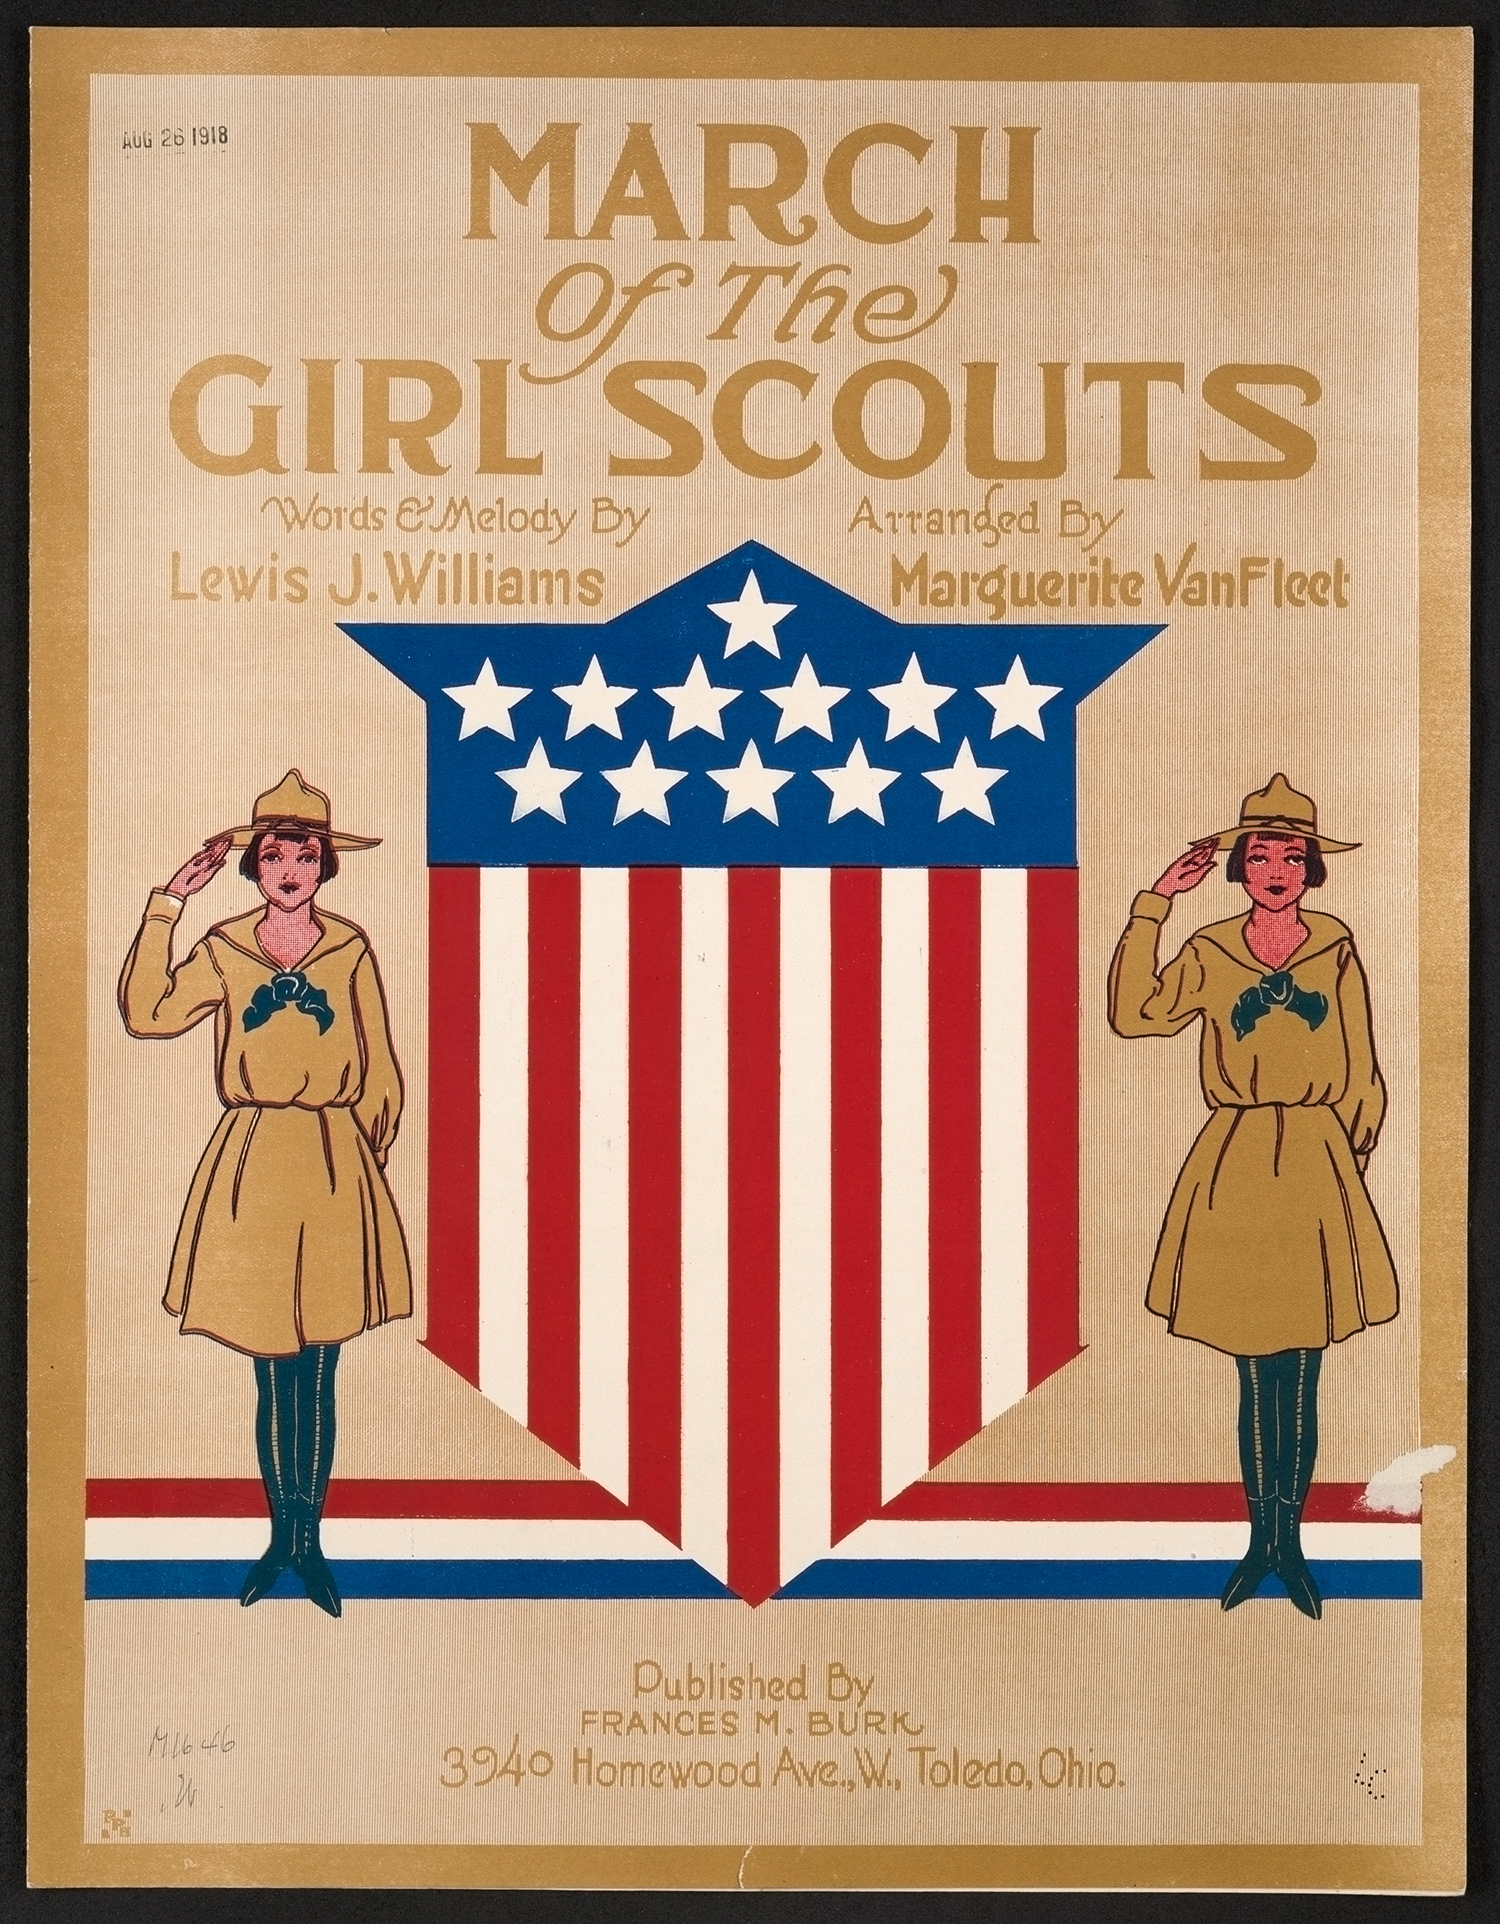 Cover for published sheet music showing a U.S. shield flanked by two uniformed Girl Scouts, saluting, with text that reads, “March of the Girl Scouts. Words and Melody by Lewis J. Williams. Arranged by Marguerite VanFleet. Published by Frances M. Burk, 3940 Homewood Ave, W., Toledo, Ohio.” 